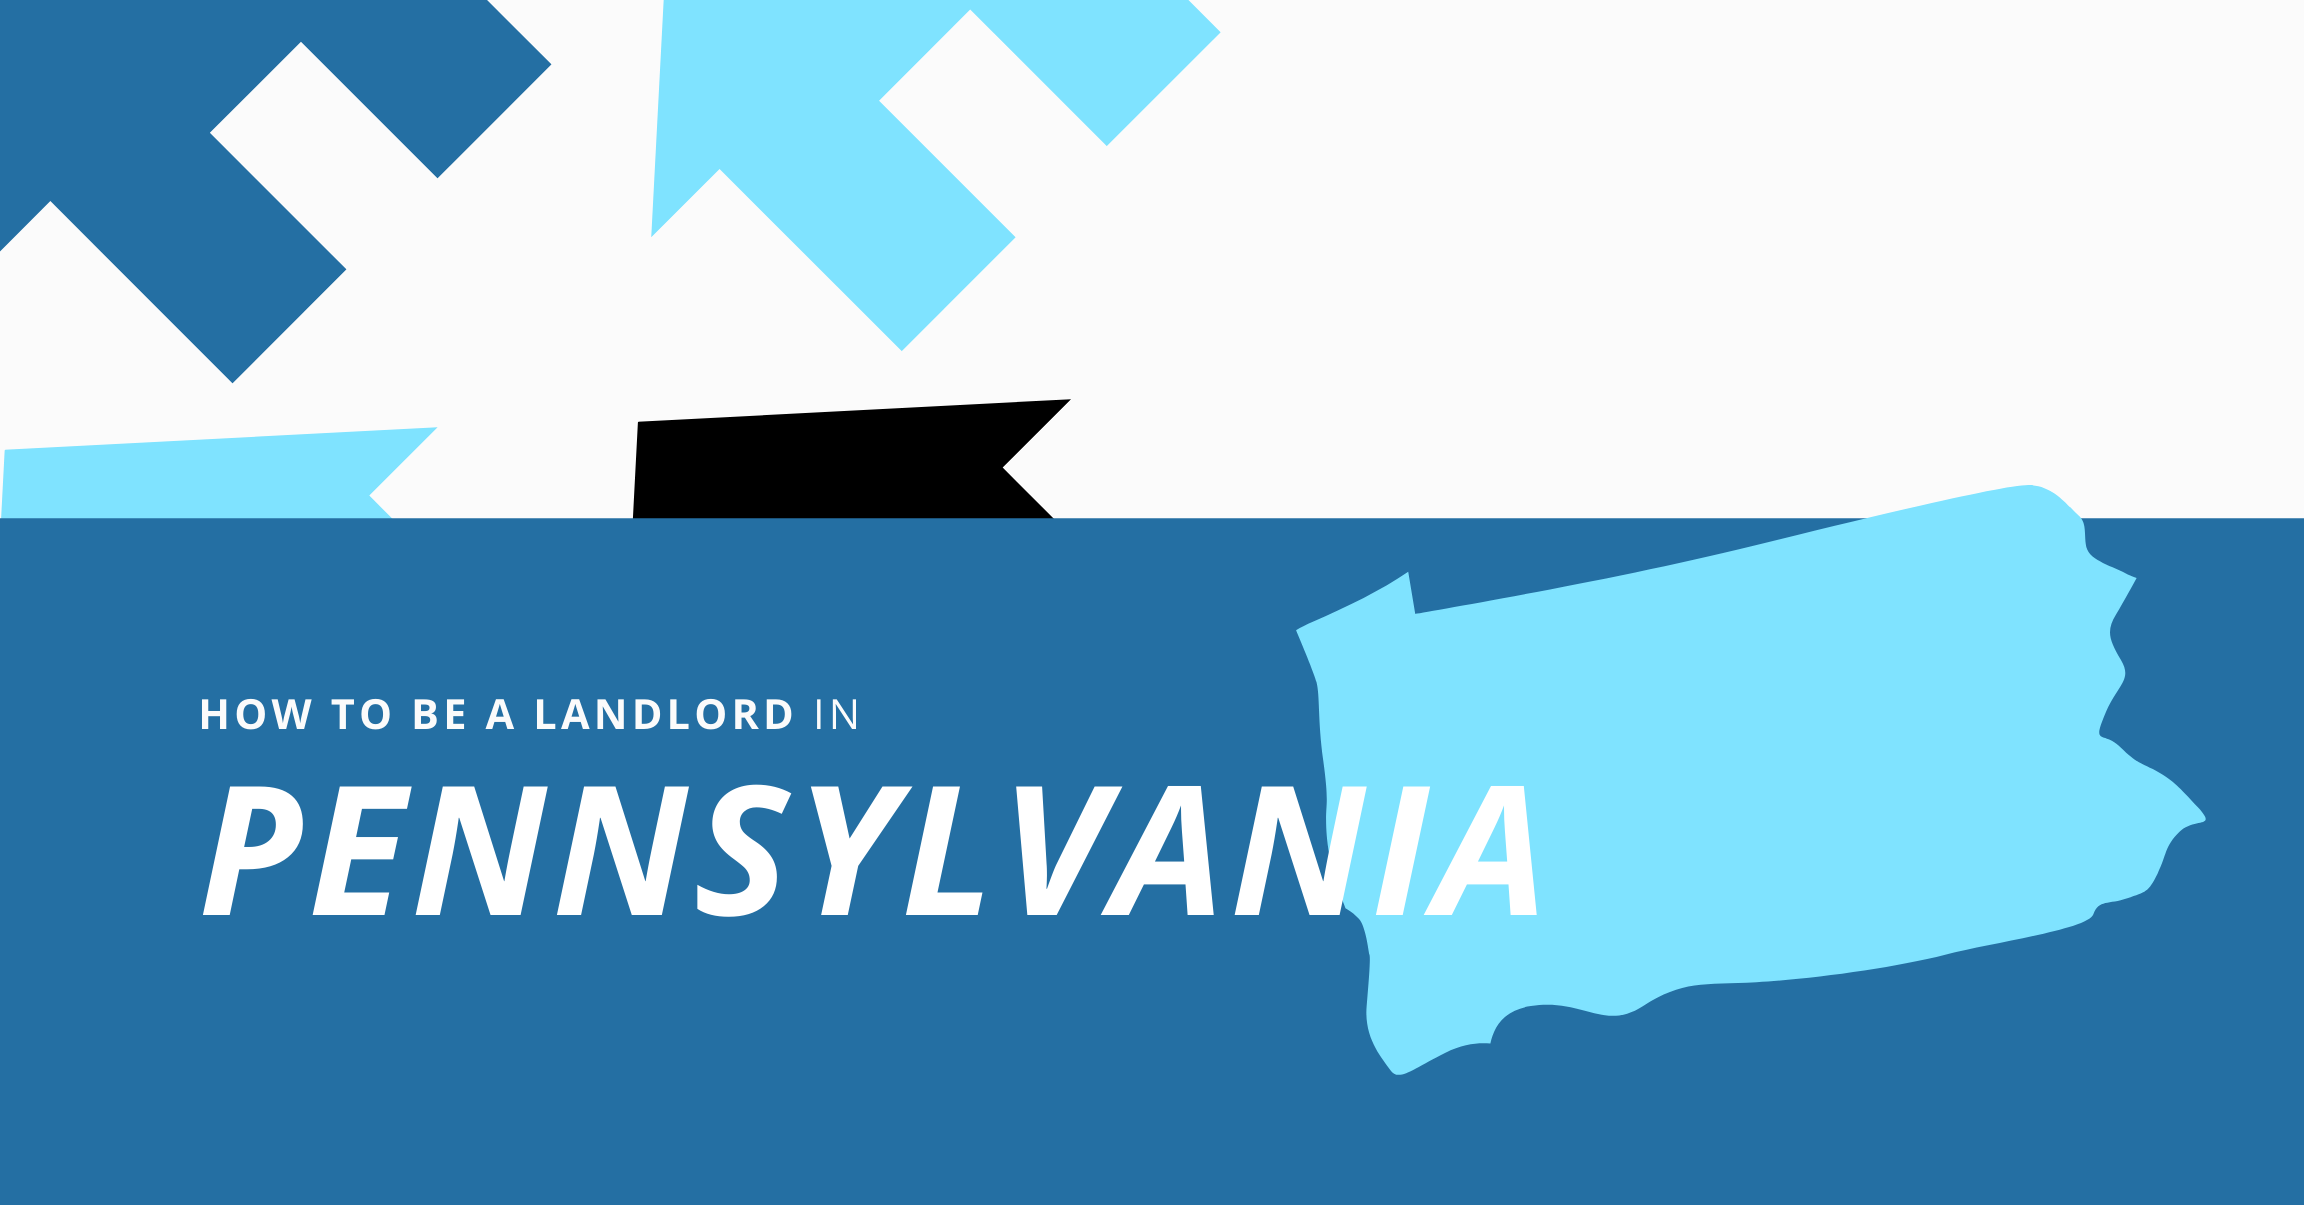 How to be a landlord in Pennsylvania